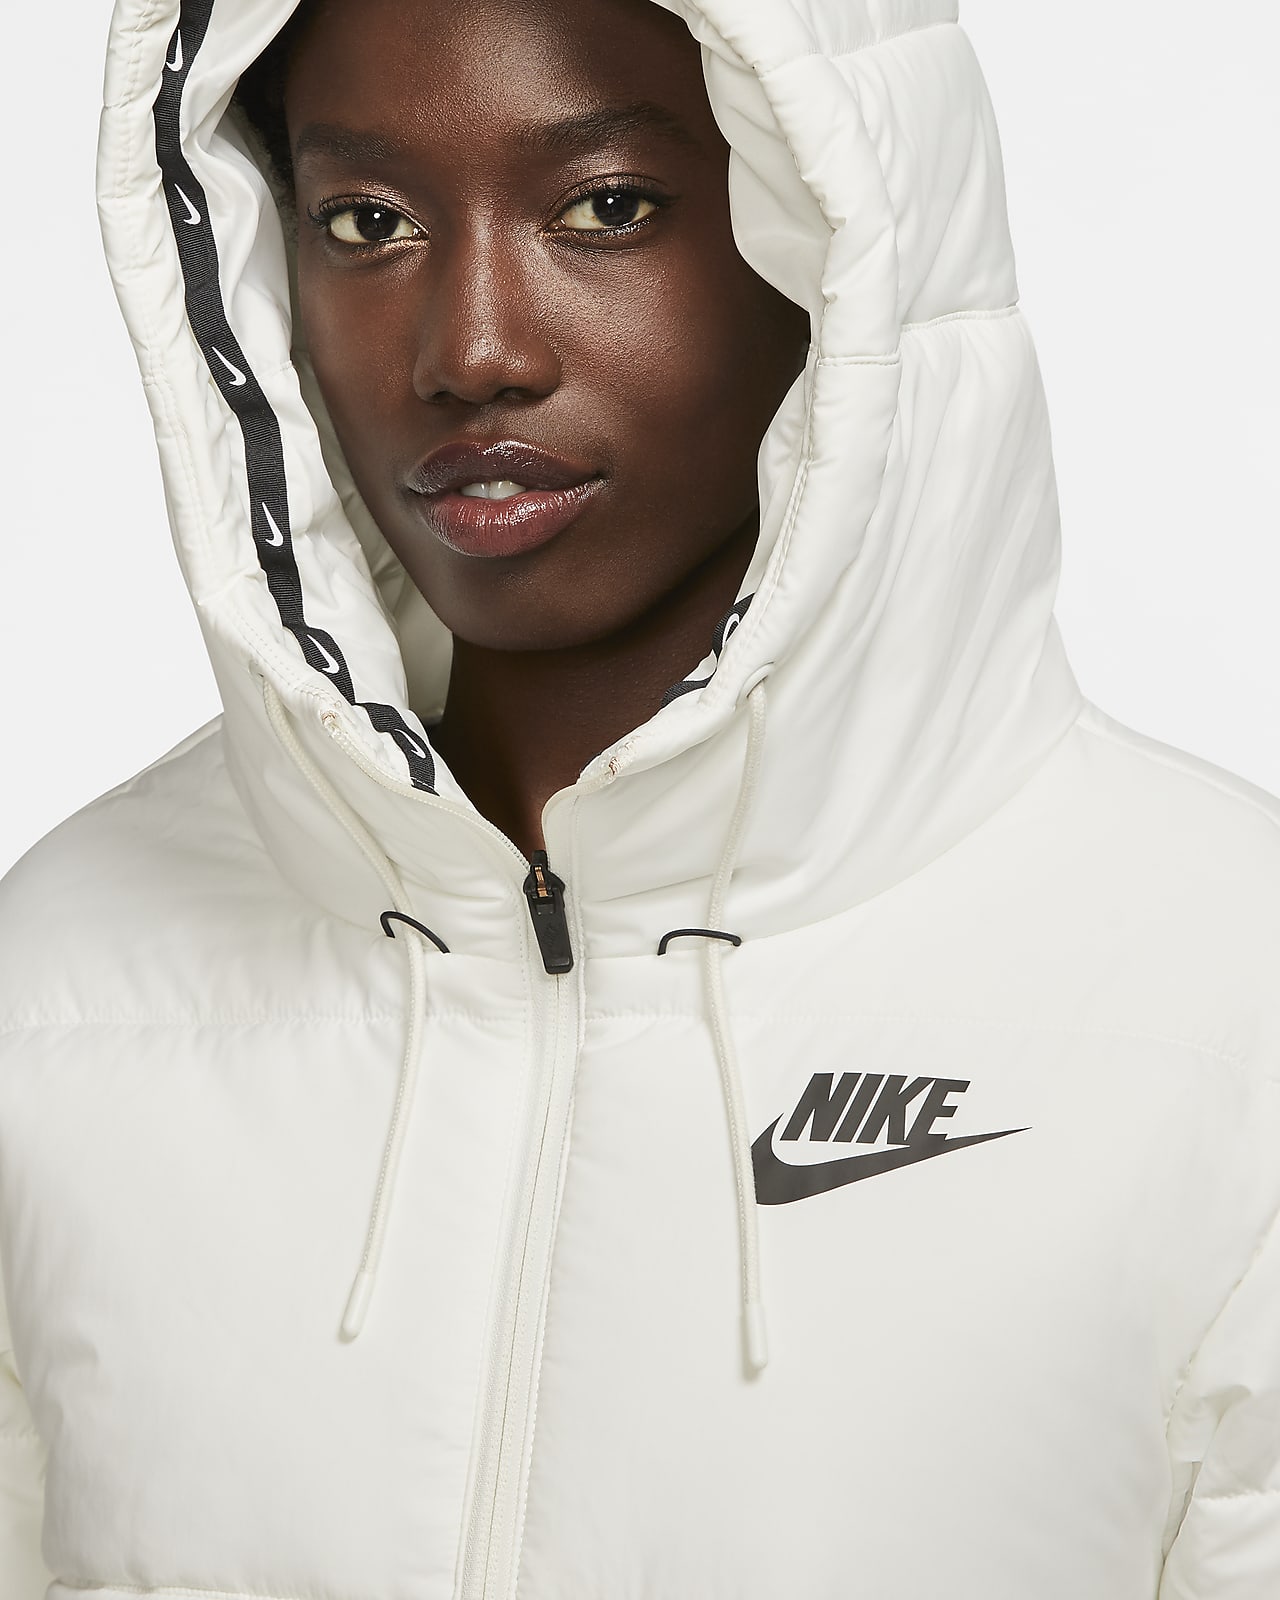 nike synthetic fill hooded jacket